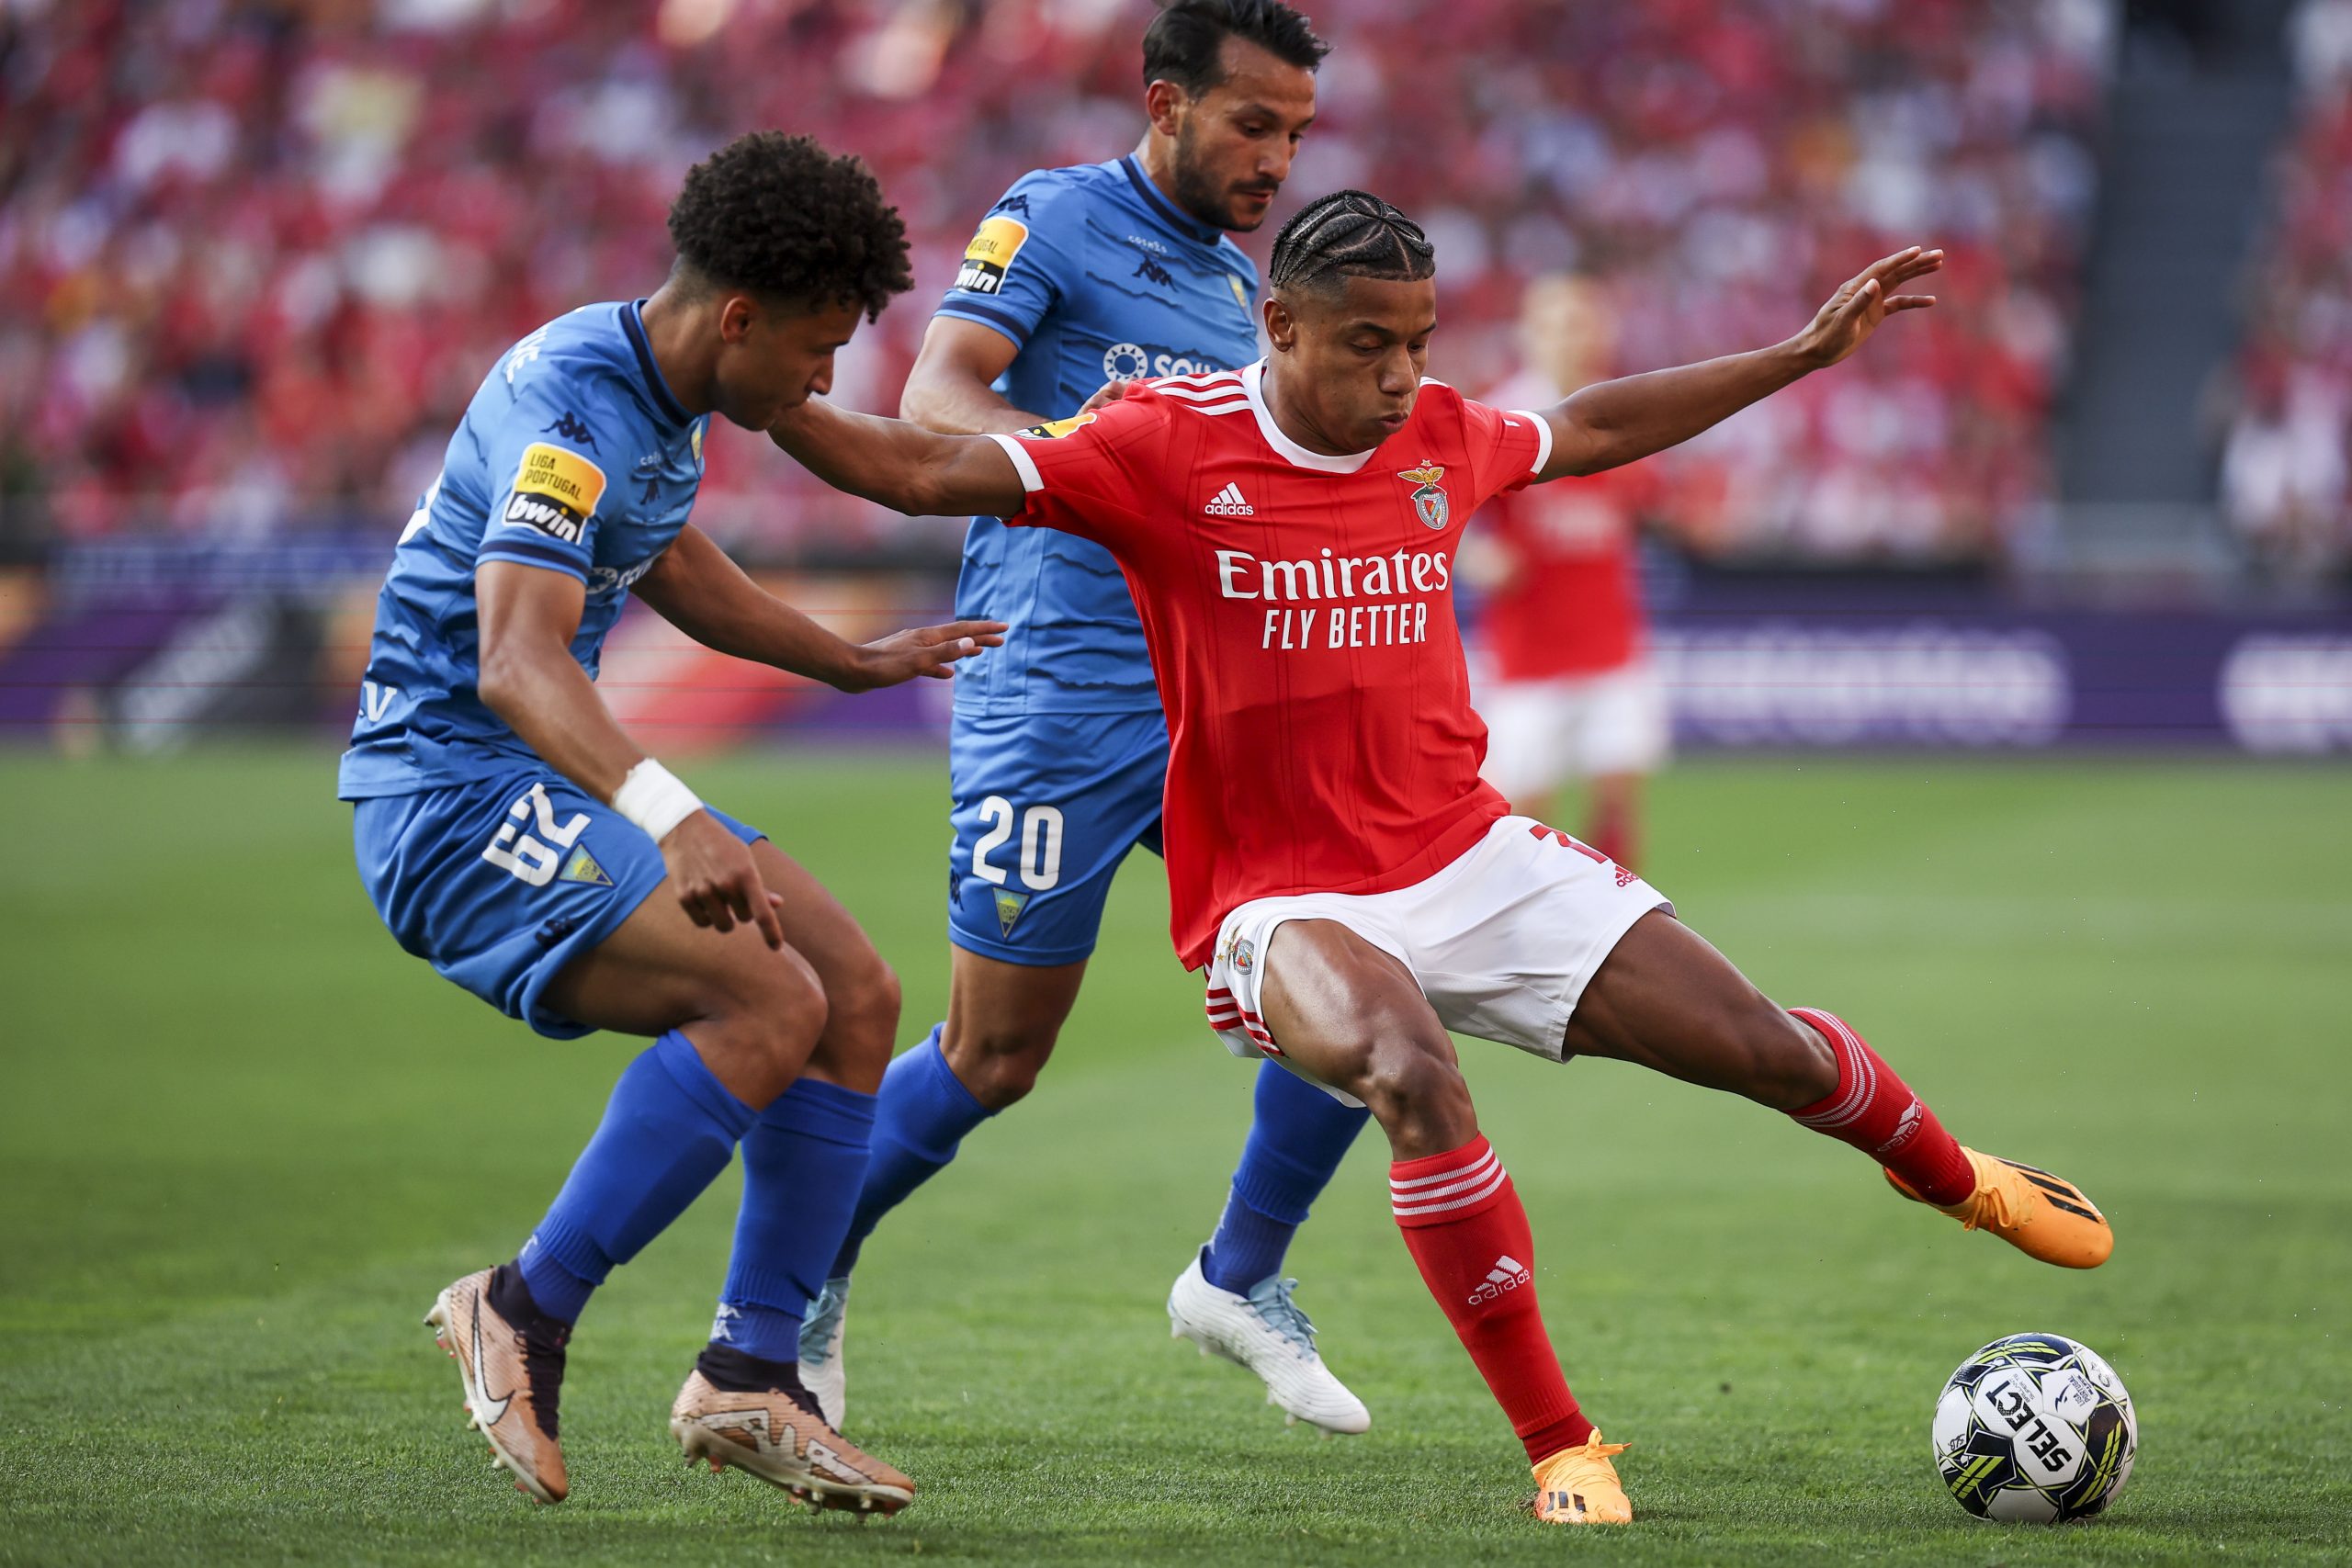 epa10588113 Benfica player David Neres (R) in action against Estoril Praia player Joao Carvalho during the Portuguese First League soccer match between SL Benfica and Estoril Praia in Lisbon, Portugal, 23 April 2023.  EPA/JOSÉ SENA GOULÃO